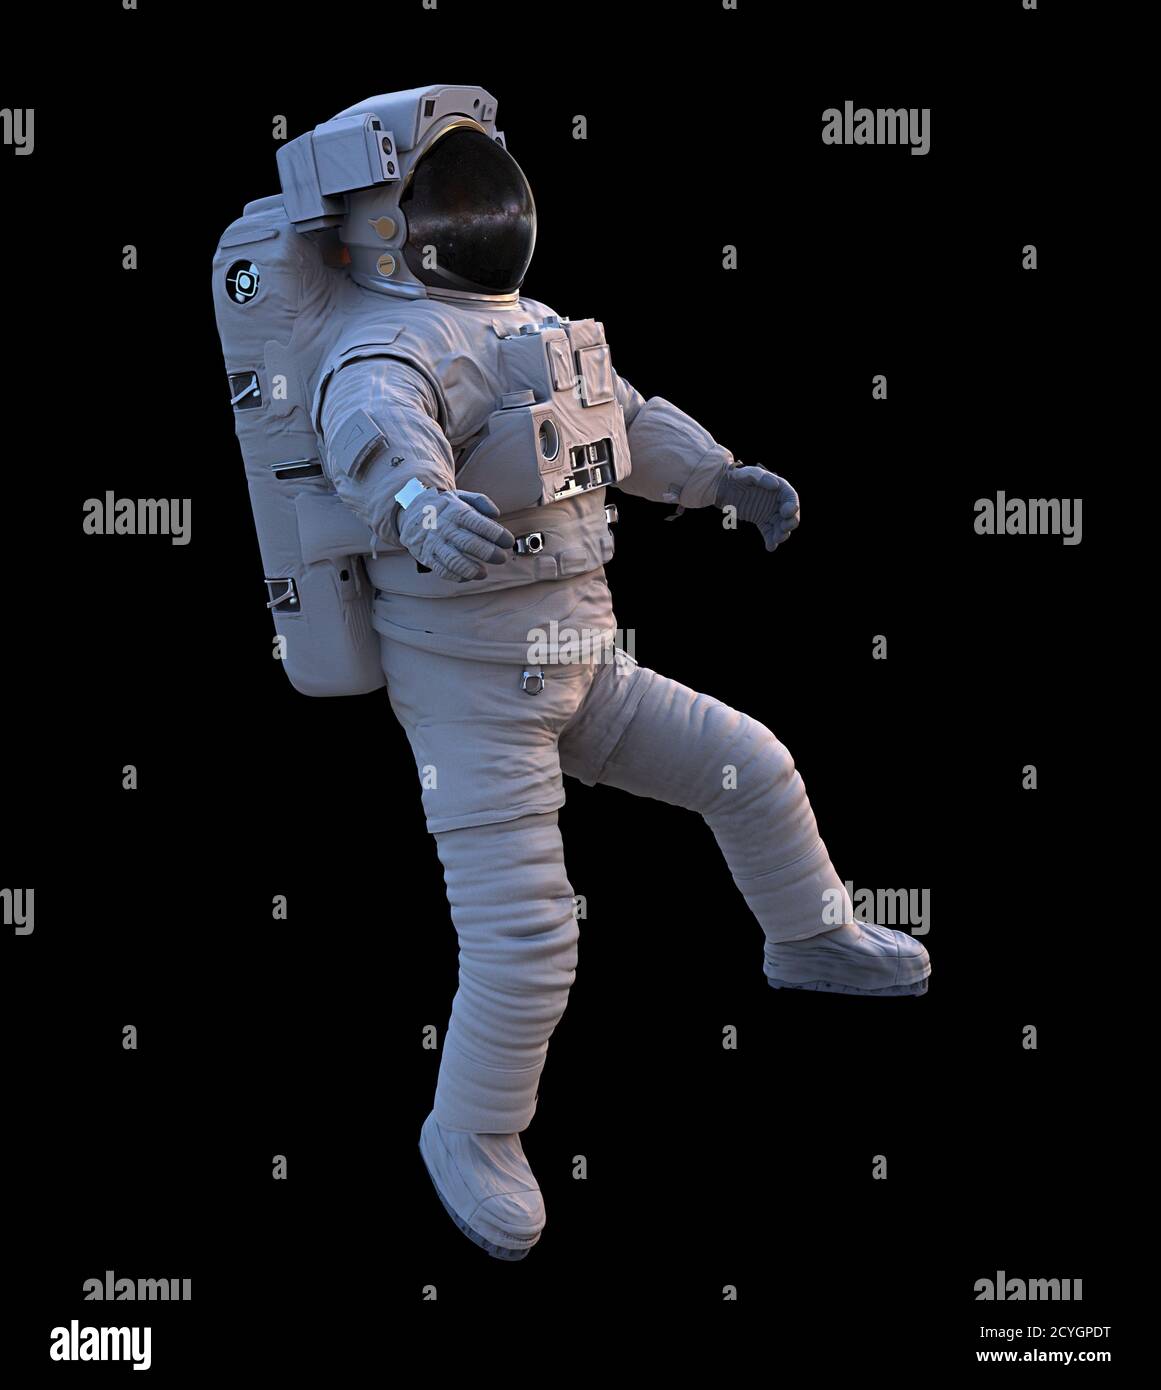 astronaut performing a spacewalk, isolated on black background Stock Photo